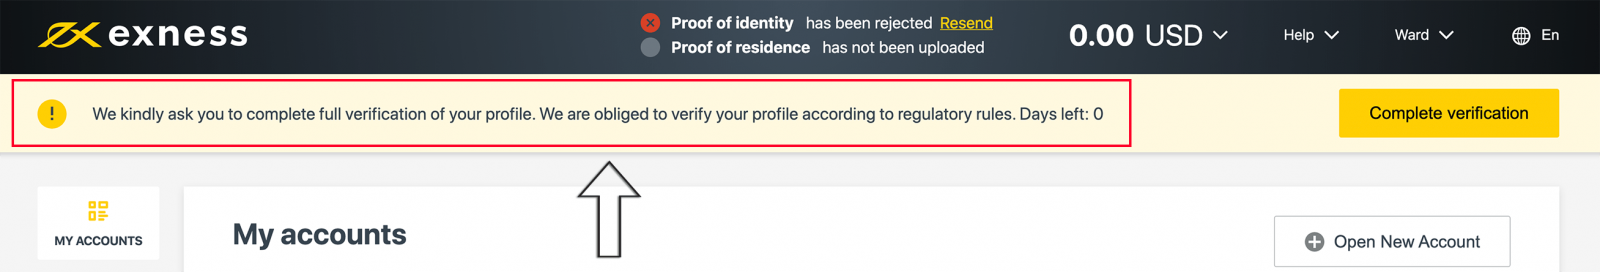 How do I know how long it will take me to verify my profile